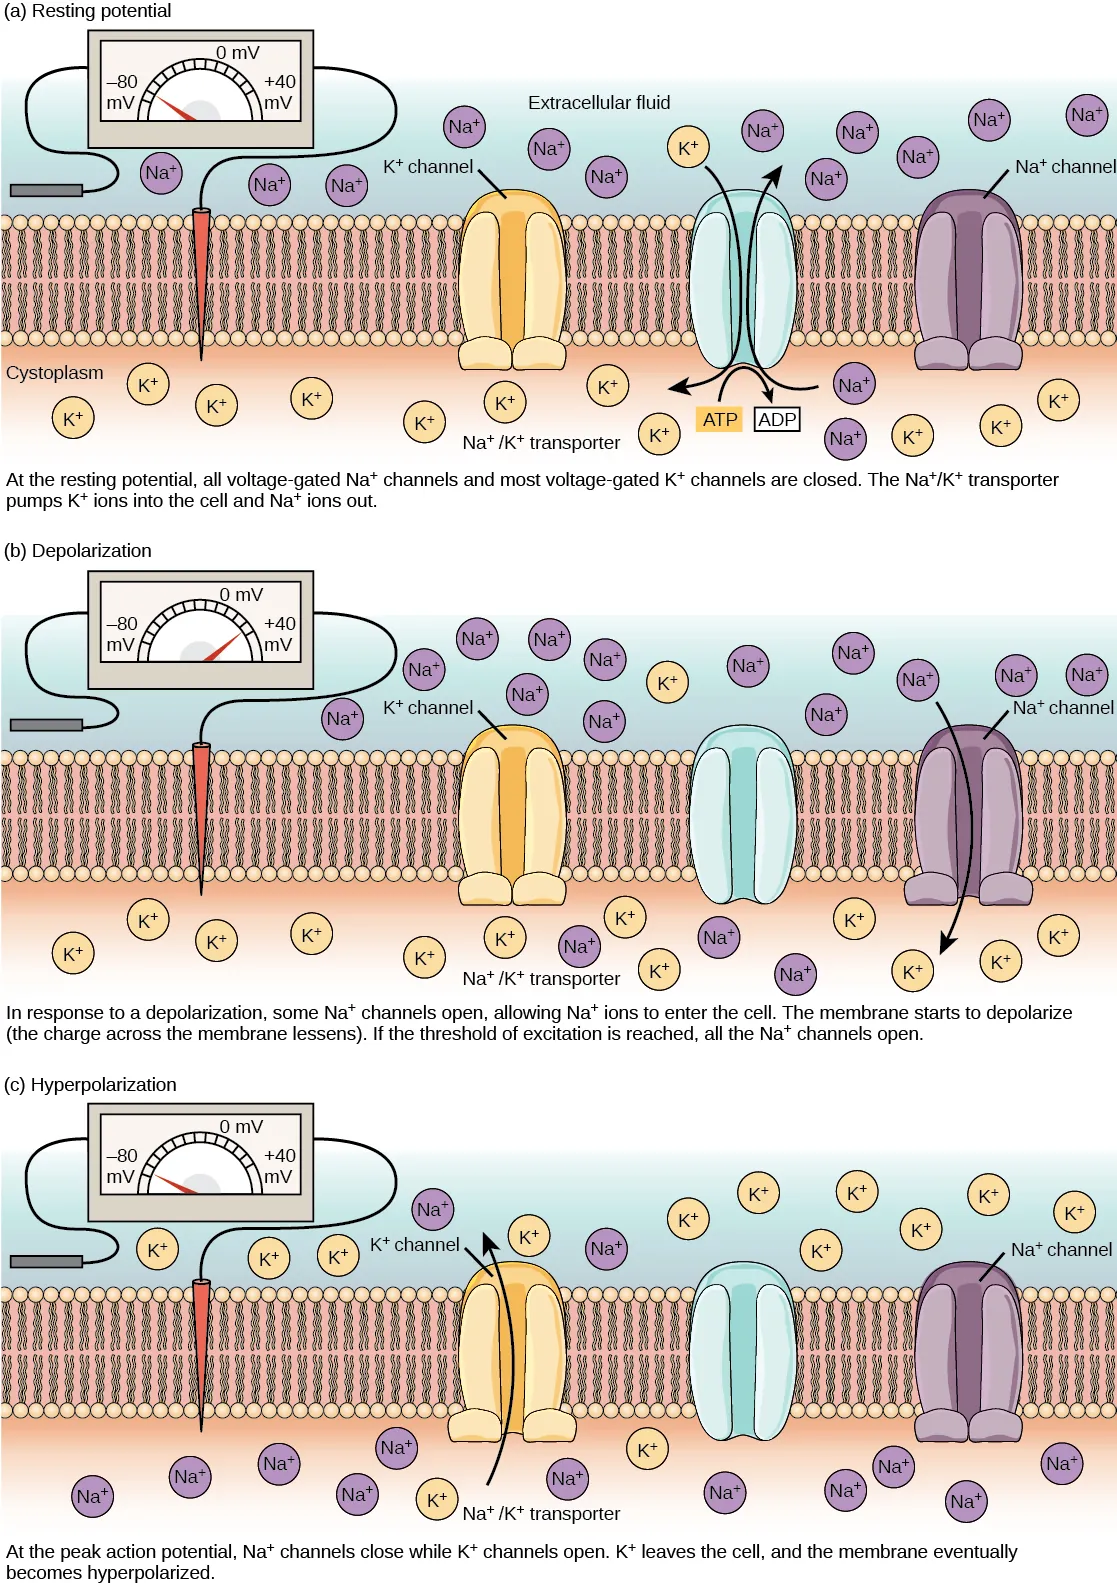 The resting membrane potential of minus seventy volts is maintained by a sodium/potassium transporter that transports sodium ions out of the cell and potassium ions in. Voltage gated sodium and potassium channels are closed. In response to a nerve impulse, some sodium channels open, allowing sodium ions to enter the cell. The membrane starts to depolarize; in other words, the charge across the membrane lessens. If the membrane potential increases to the threshold of excitation, all the sodium channels open. At the peak action potential, potassium channels open and potassium ions leave the cell. The membrane eventually becomes hyperpolarized.